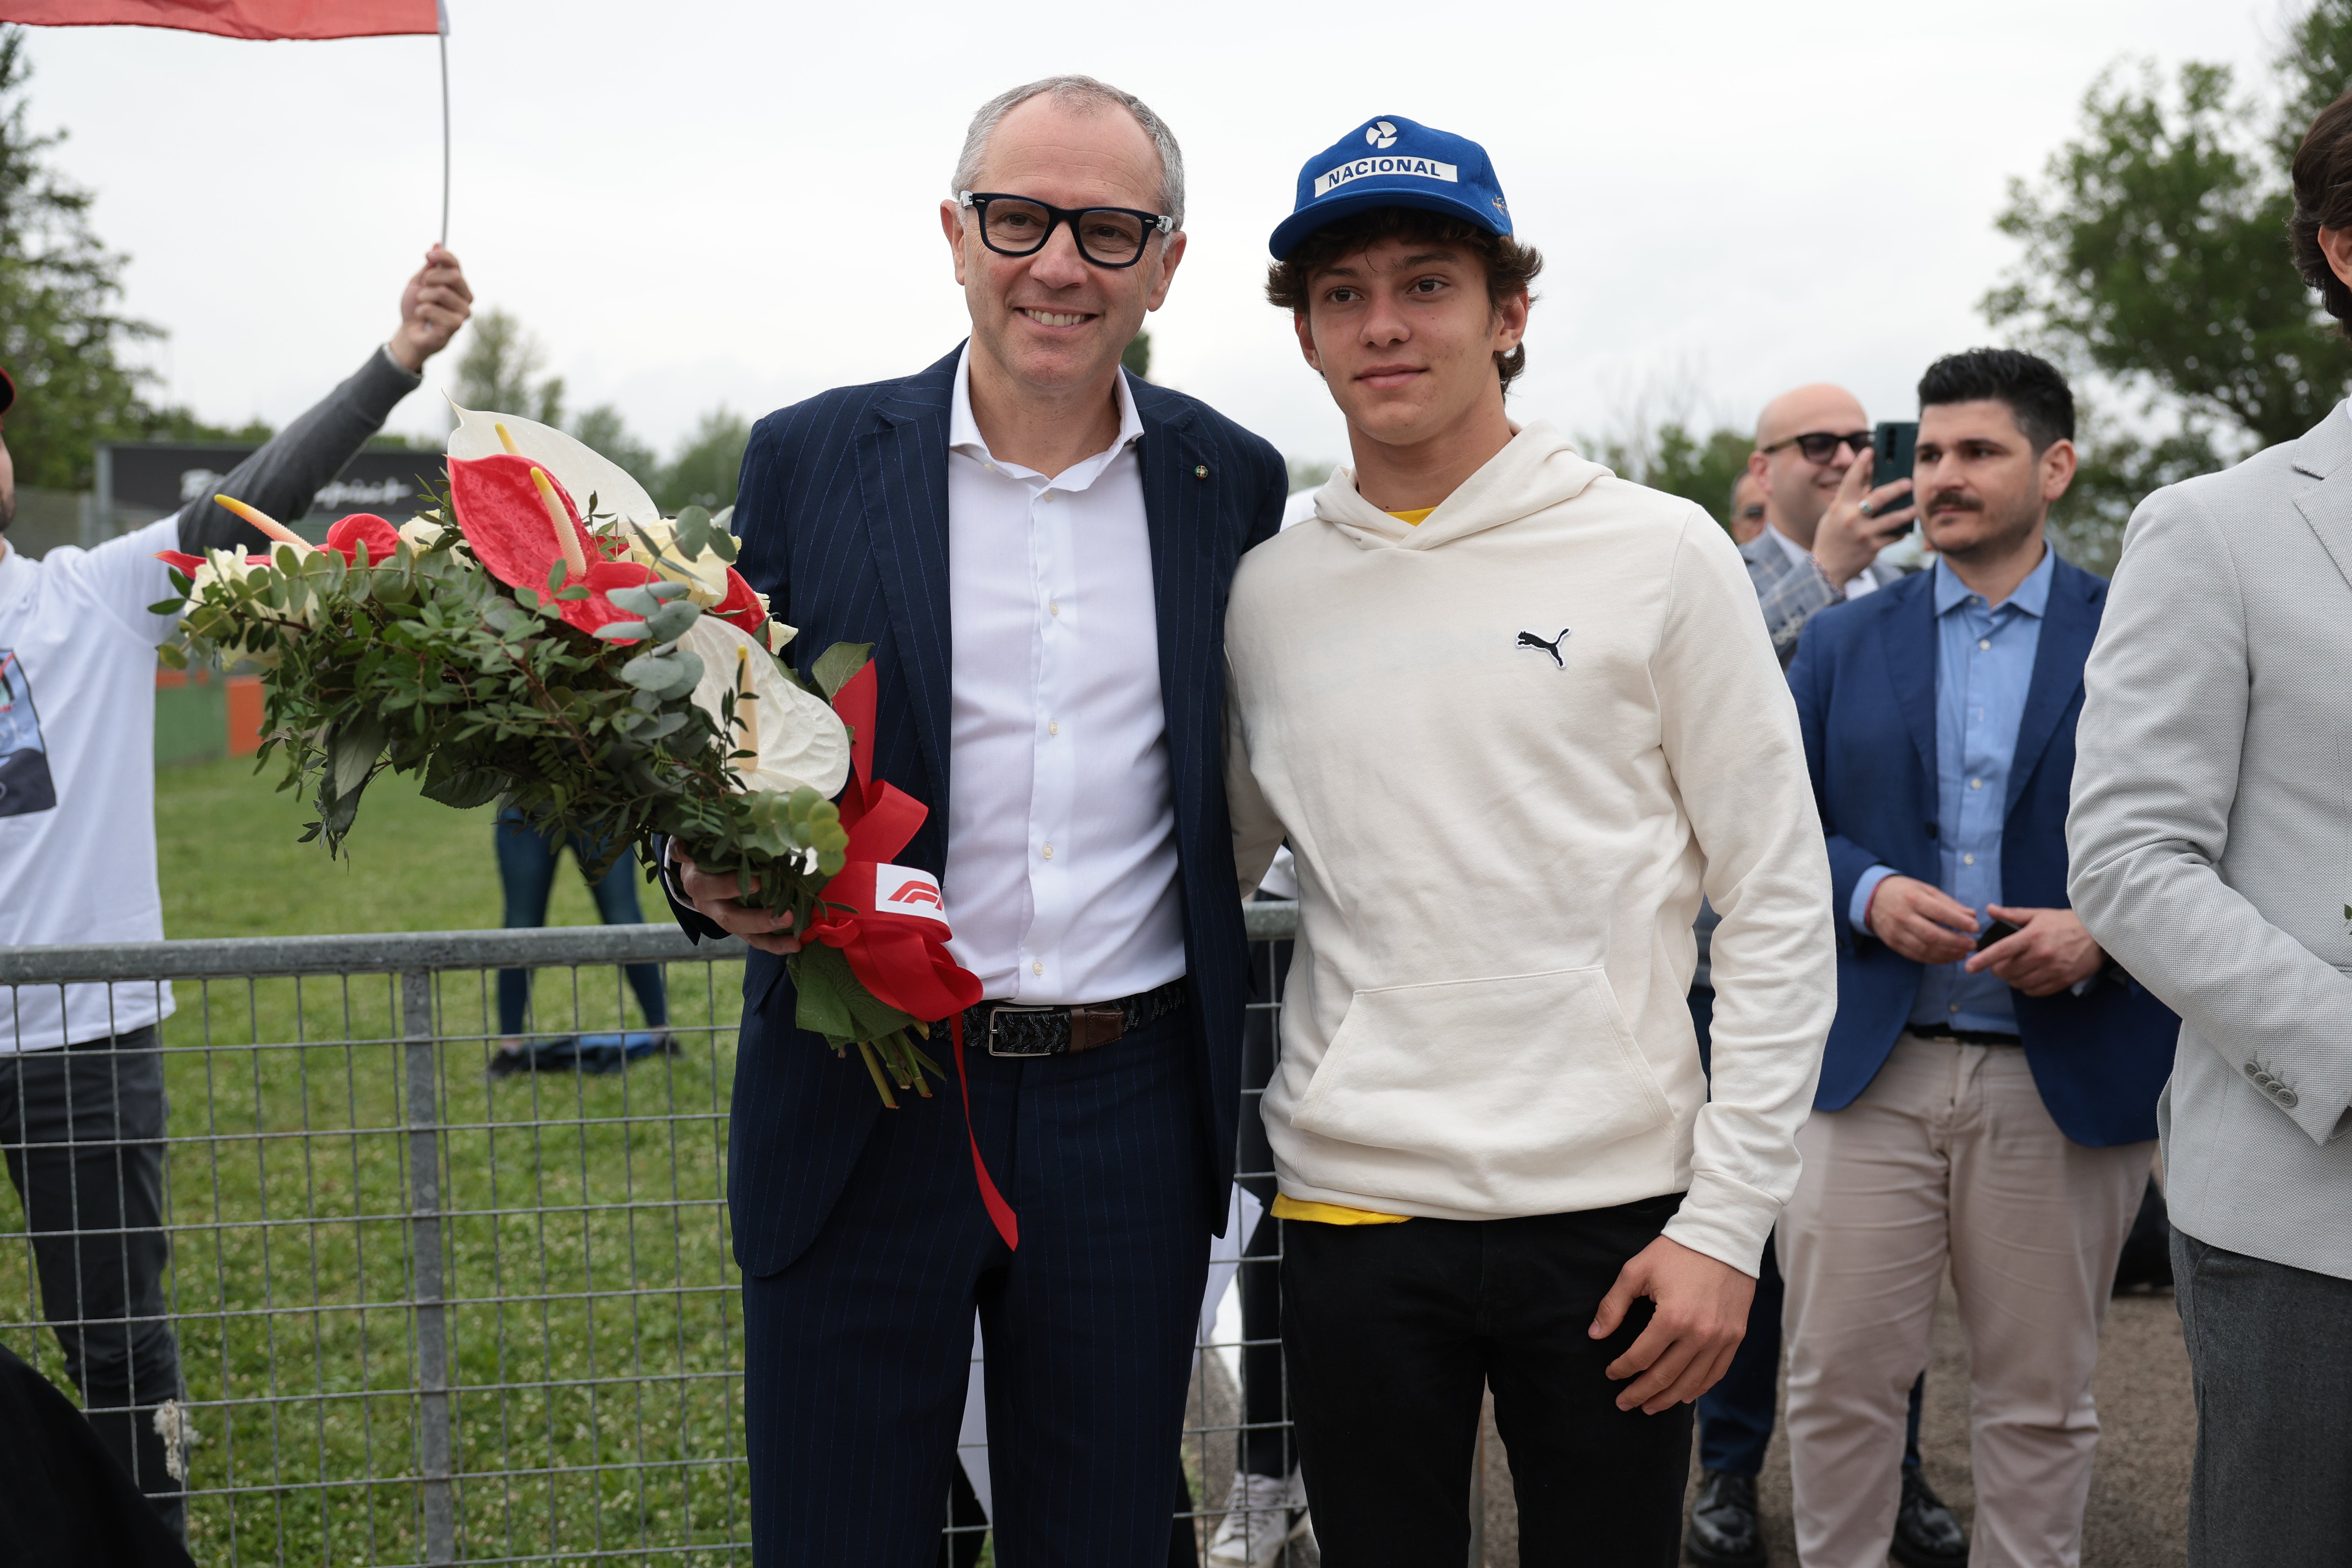 Antonelli alongside F1 chief Stefano Domenicali at an event commemorating the 30th anniversary of Ayrton Senna’s death at Imola